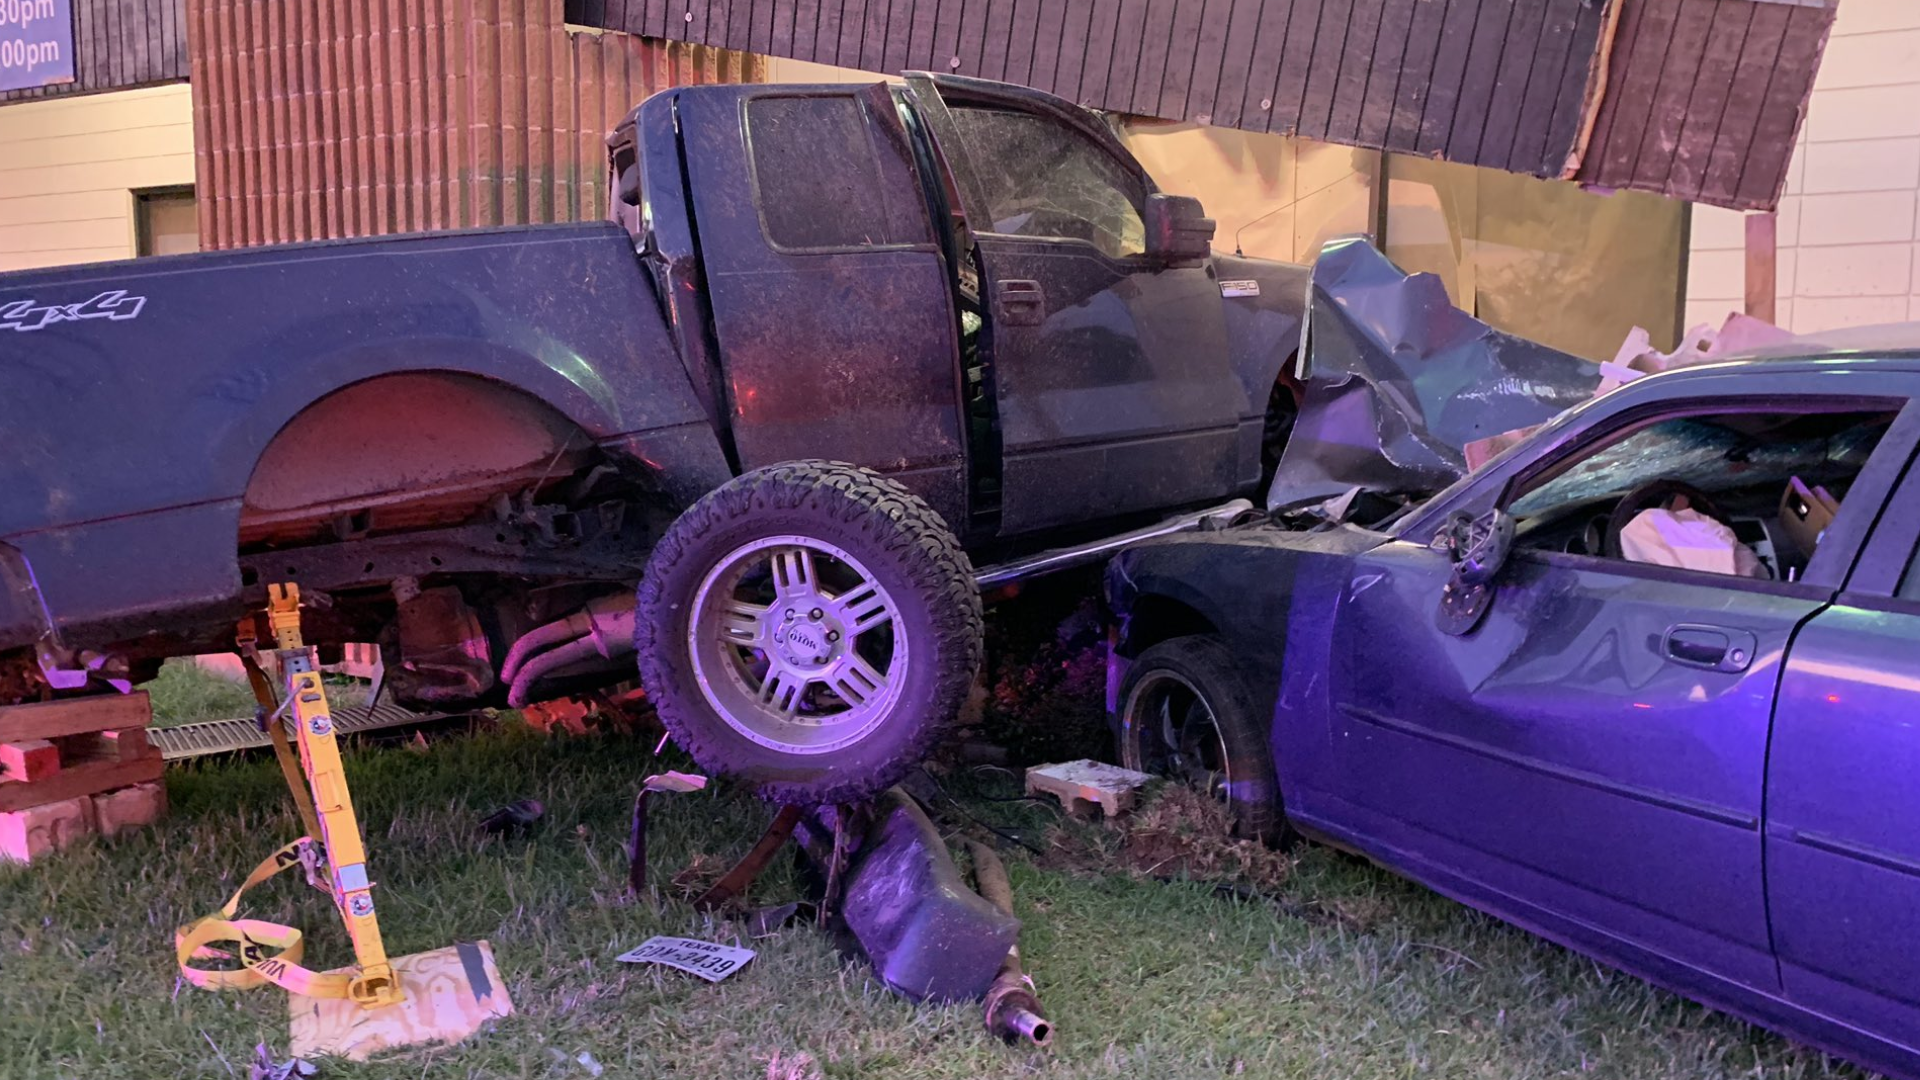 Harris County deputies said two Dodge Chargers were racing when one of them crashed into a truck and pushed it into a building, killing the driver of the truck.